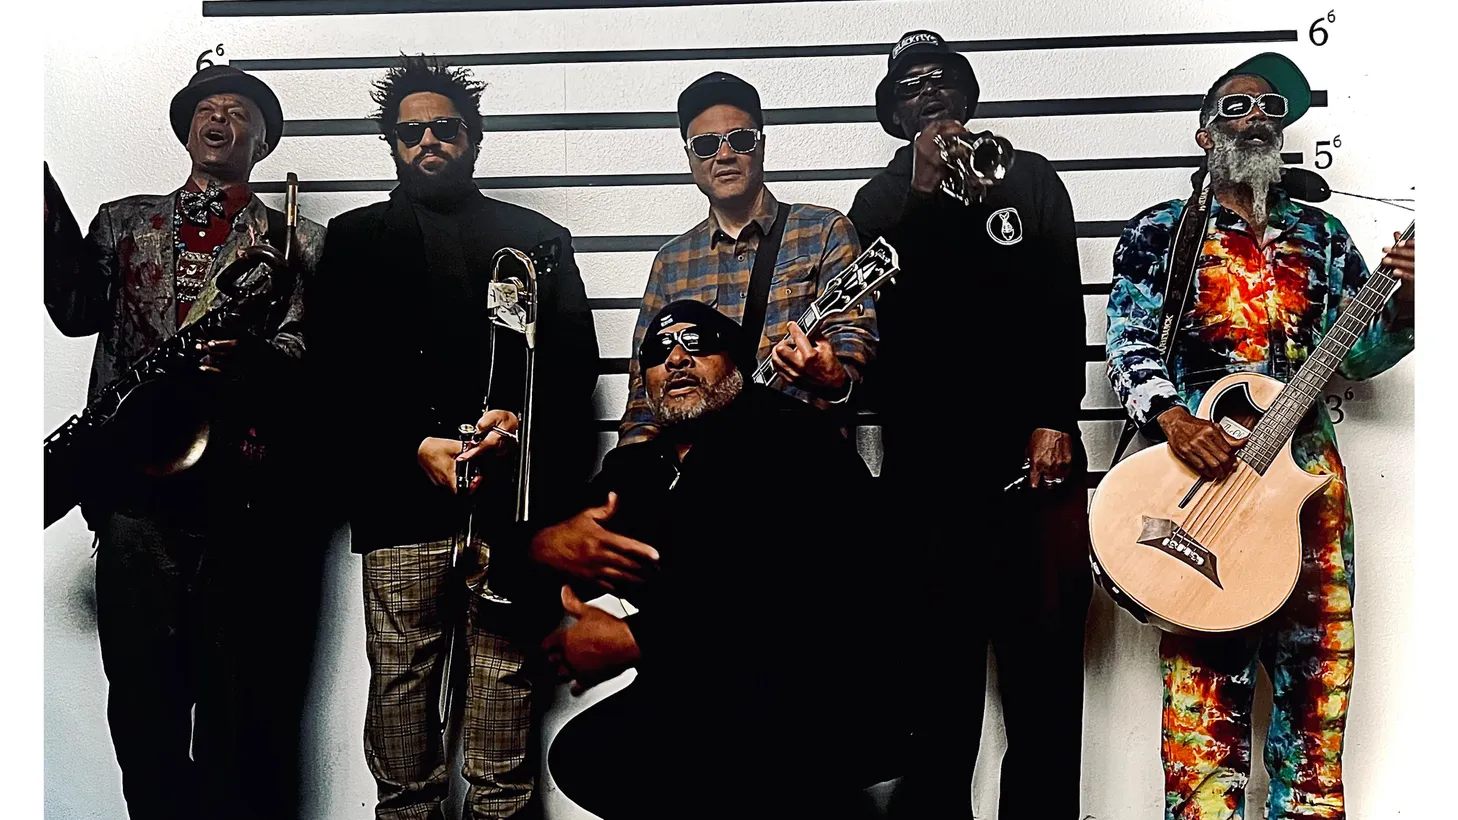 Formed in Los Angeles in 1979, the familyhood known as Fishbone shares “All We Have Is Now,” a sentiment with which we’re familiar but can be hard to grasp in our everyday lives.